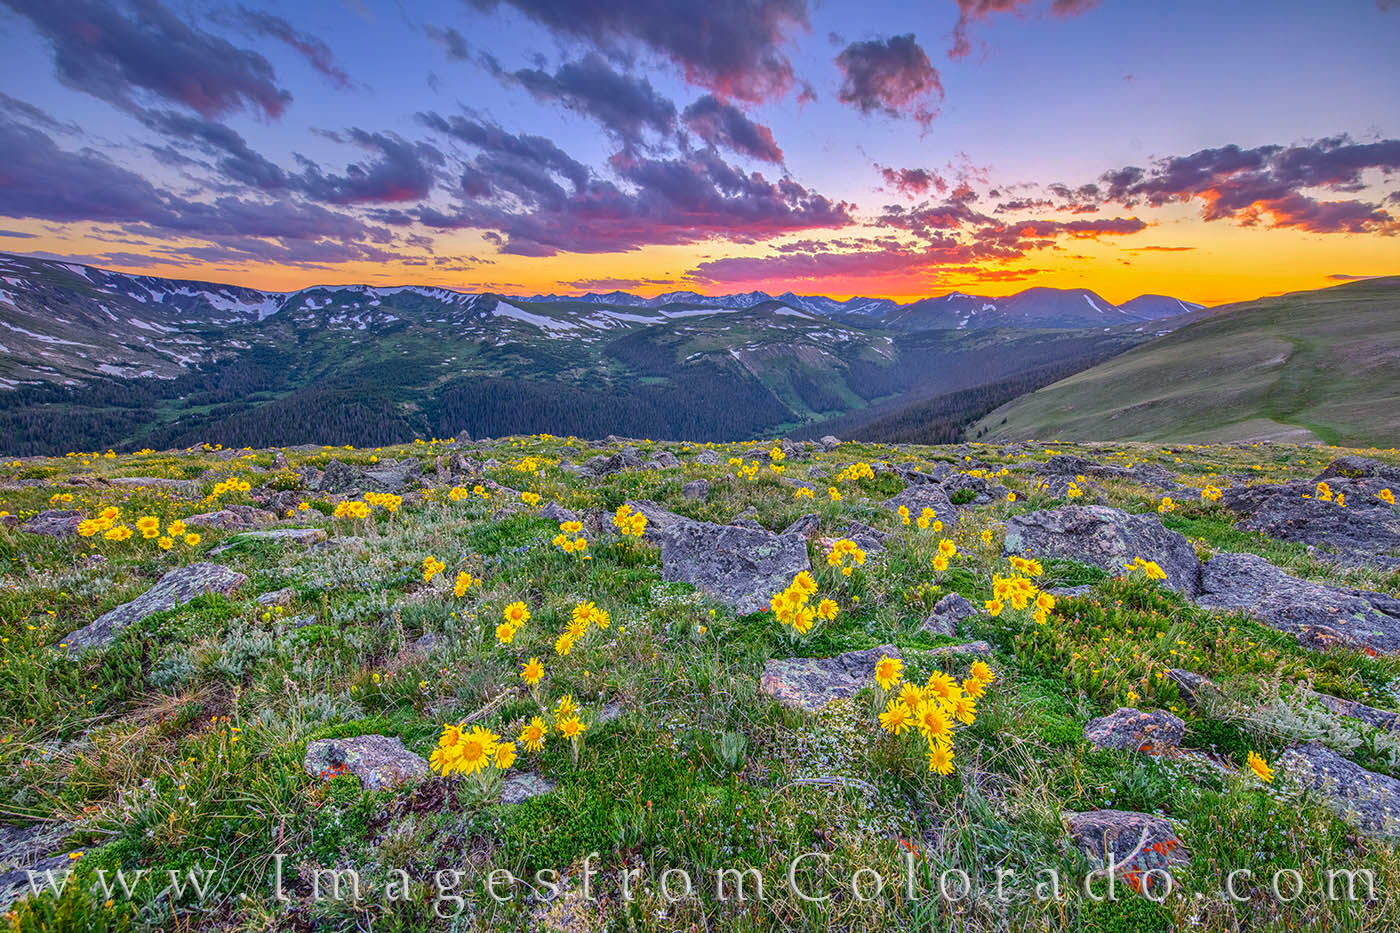 High above treeline and a good walk away from Trail Ridge Road, sunflowers fill the slopes of the Rocky Mountains in Rocky Mountain...